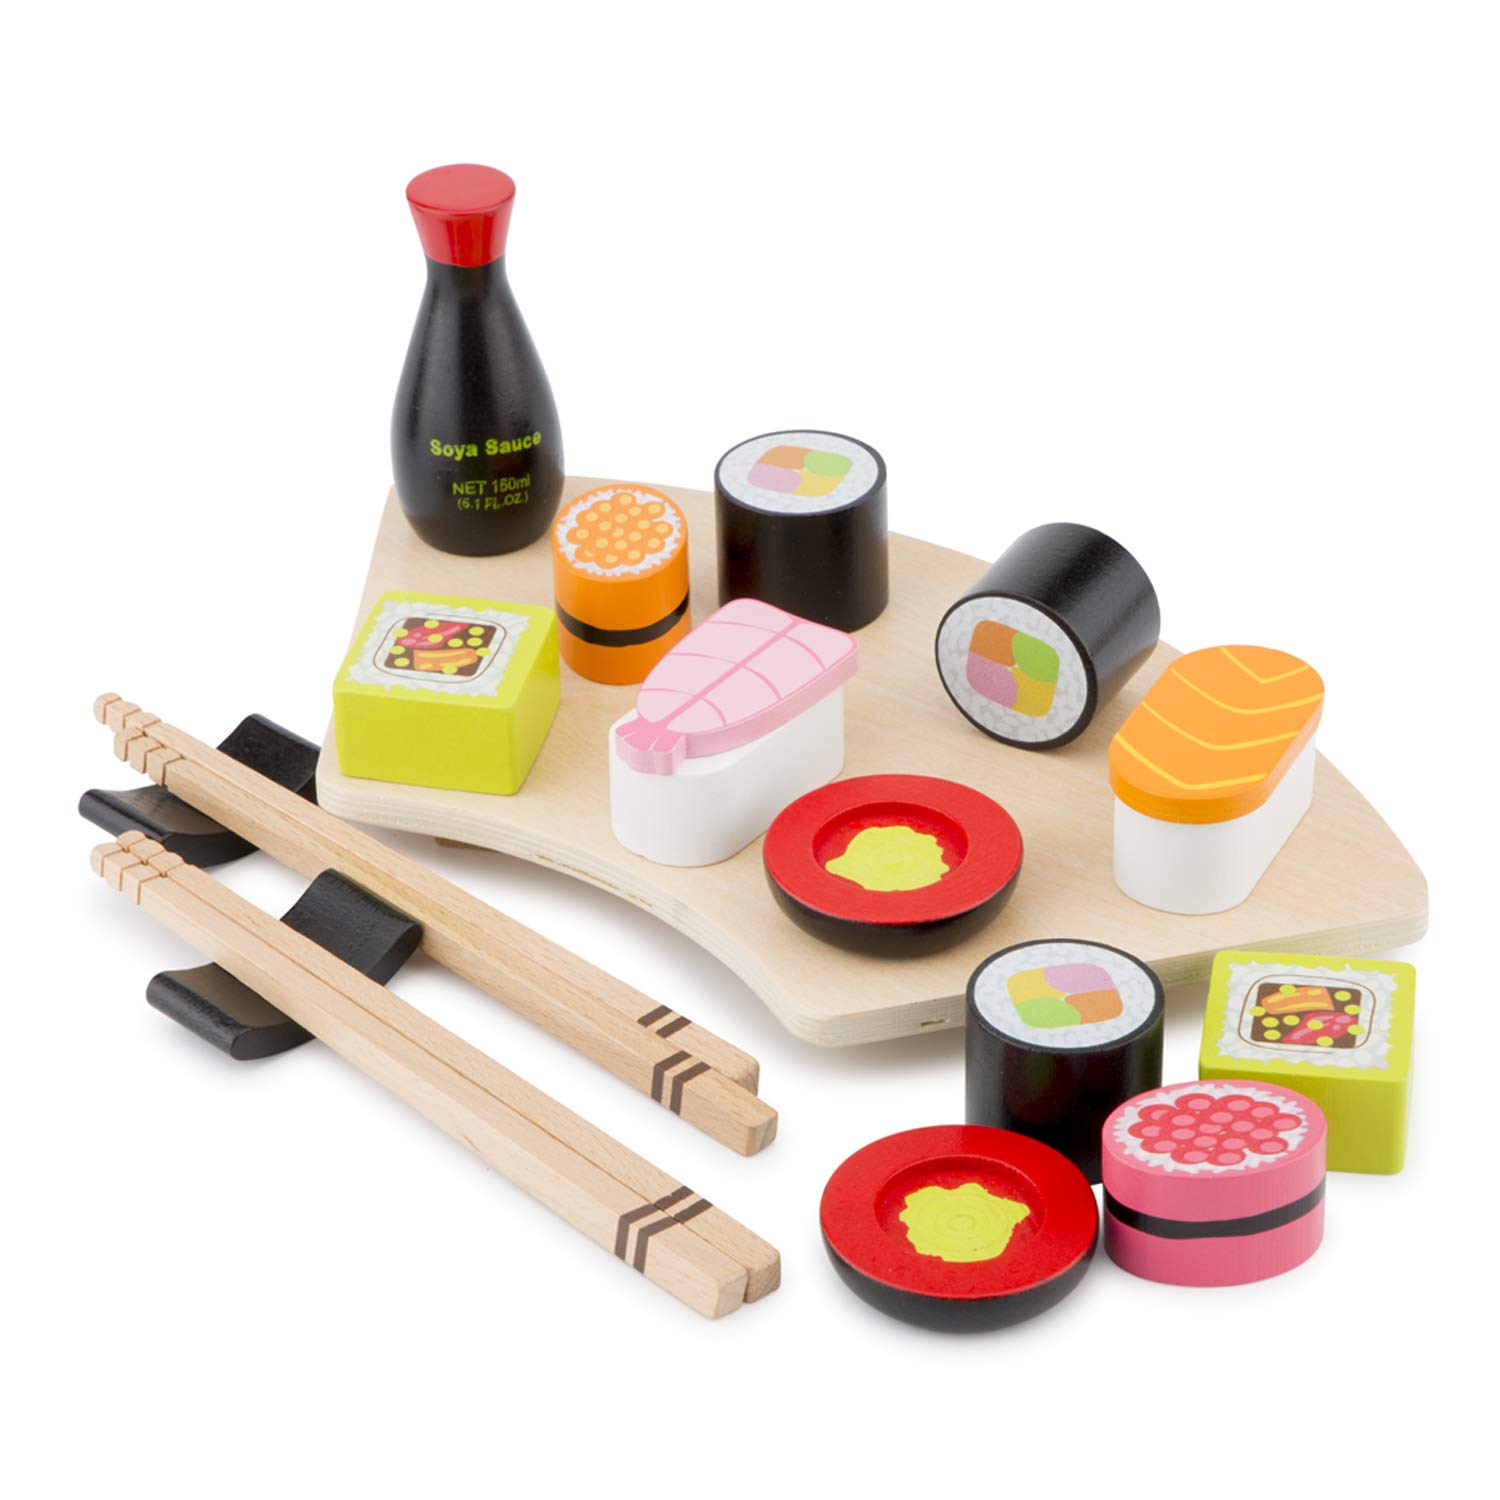 New Classic Toys Wooden Pretend Play Toy for Kids Sushi Set Cooking Simulation Educational Toys and Color Perception Toy for Preschool Age Toddlers Boys Girls Multi-Colour Colour